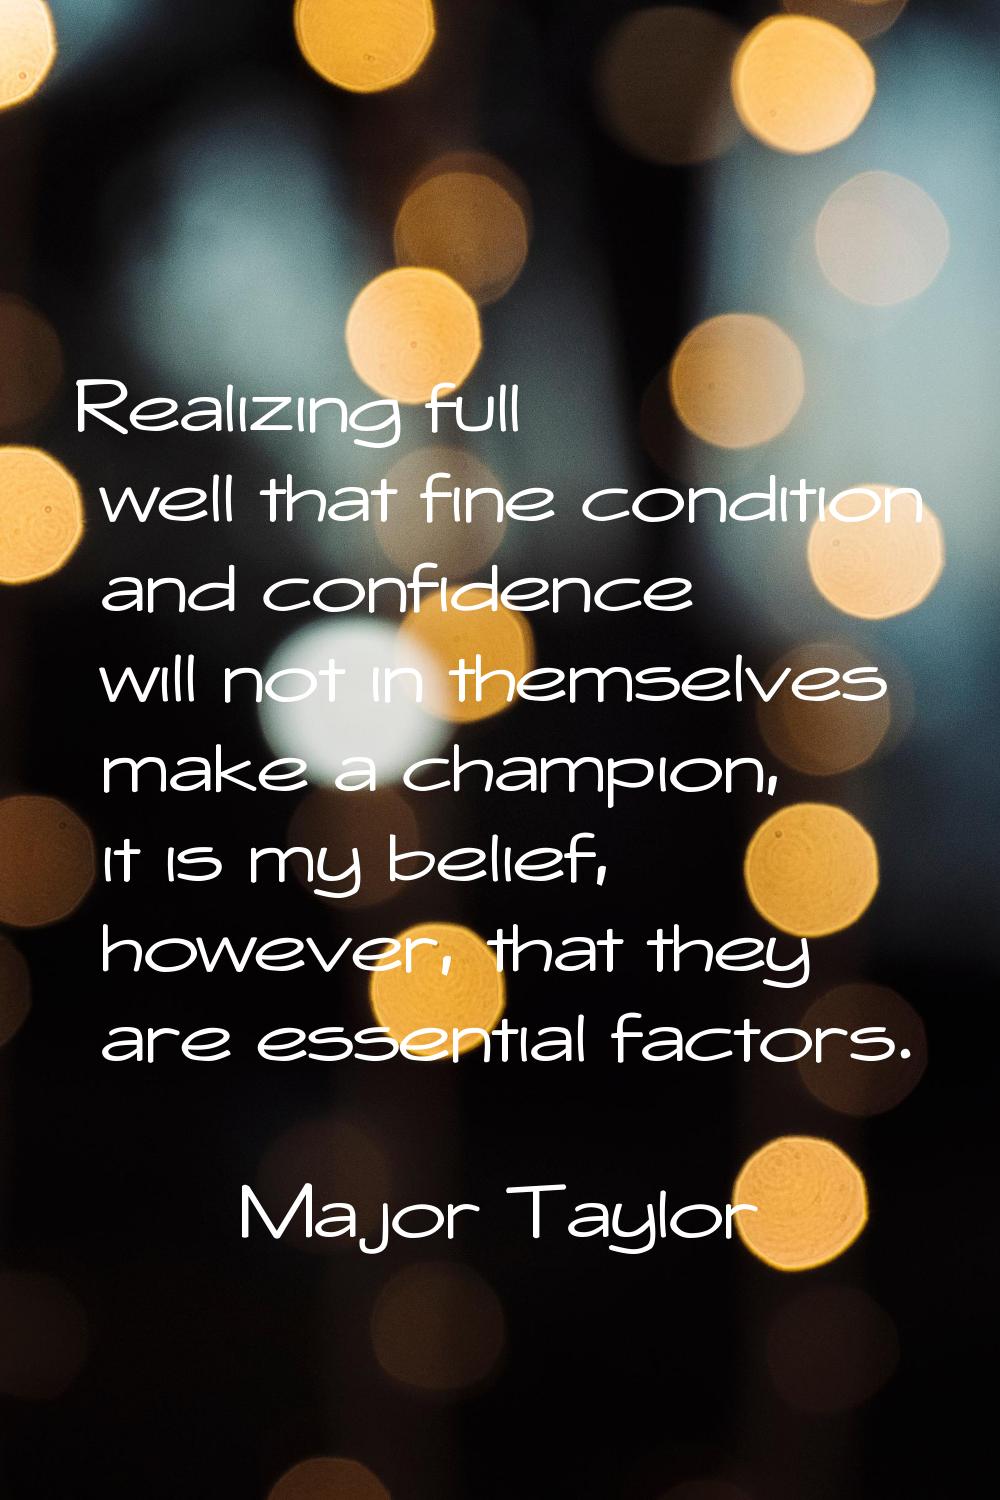 Realizing full well that fine condition and confidence will not in themselves make a champion, it i